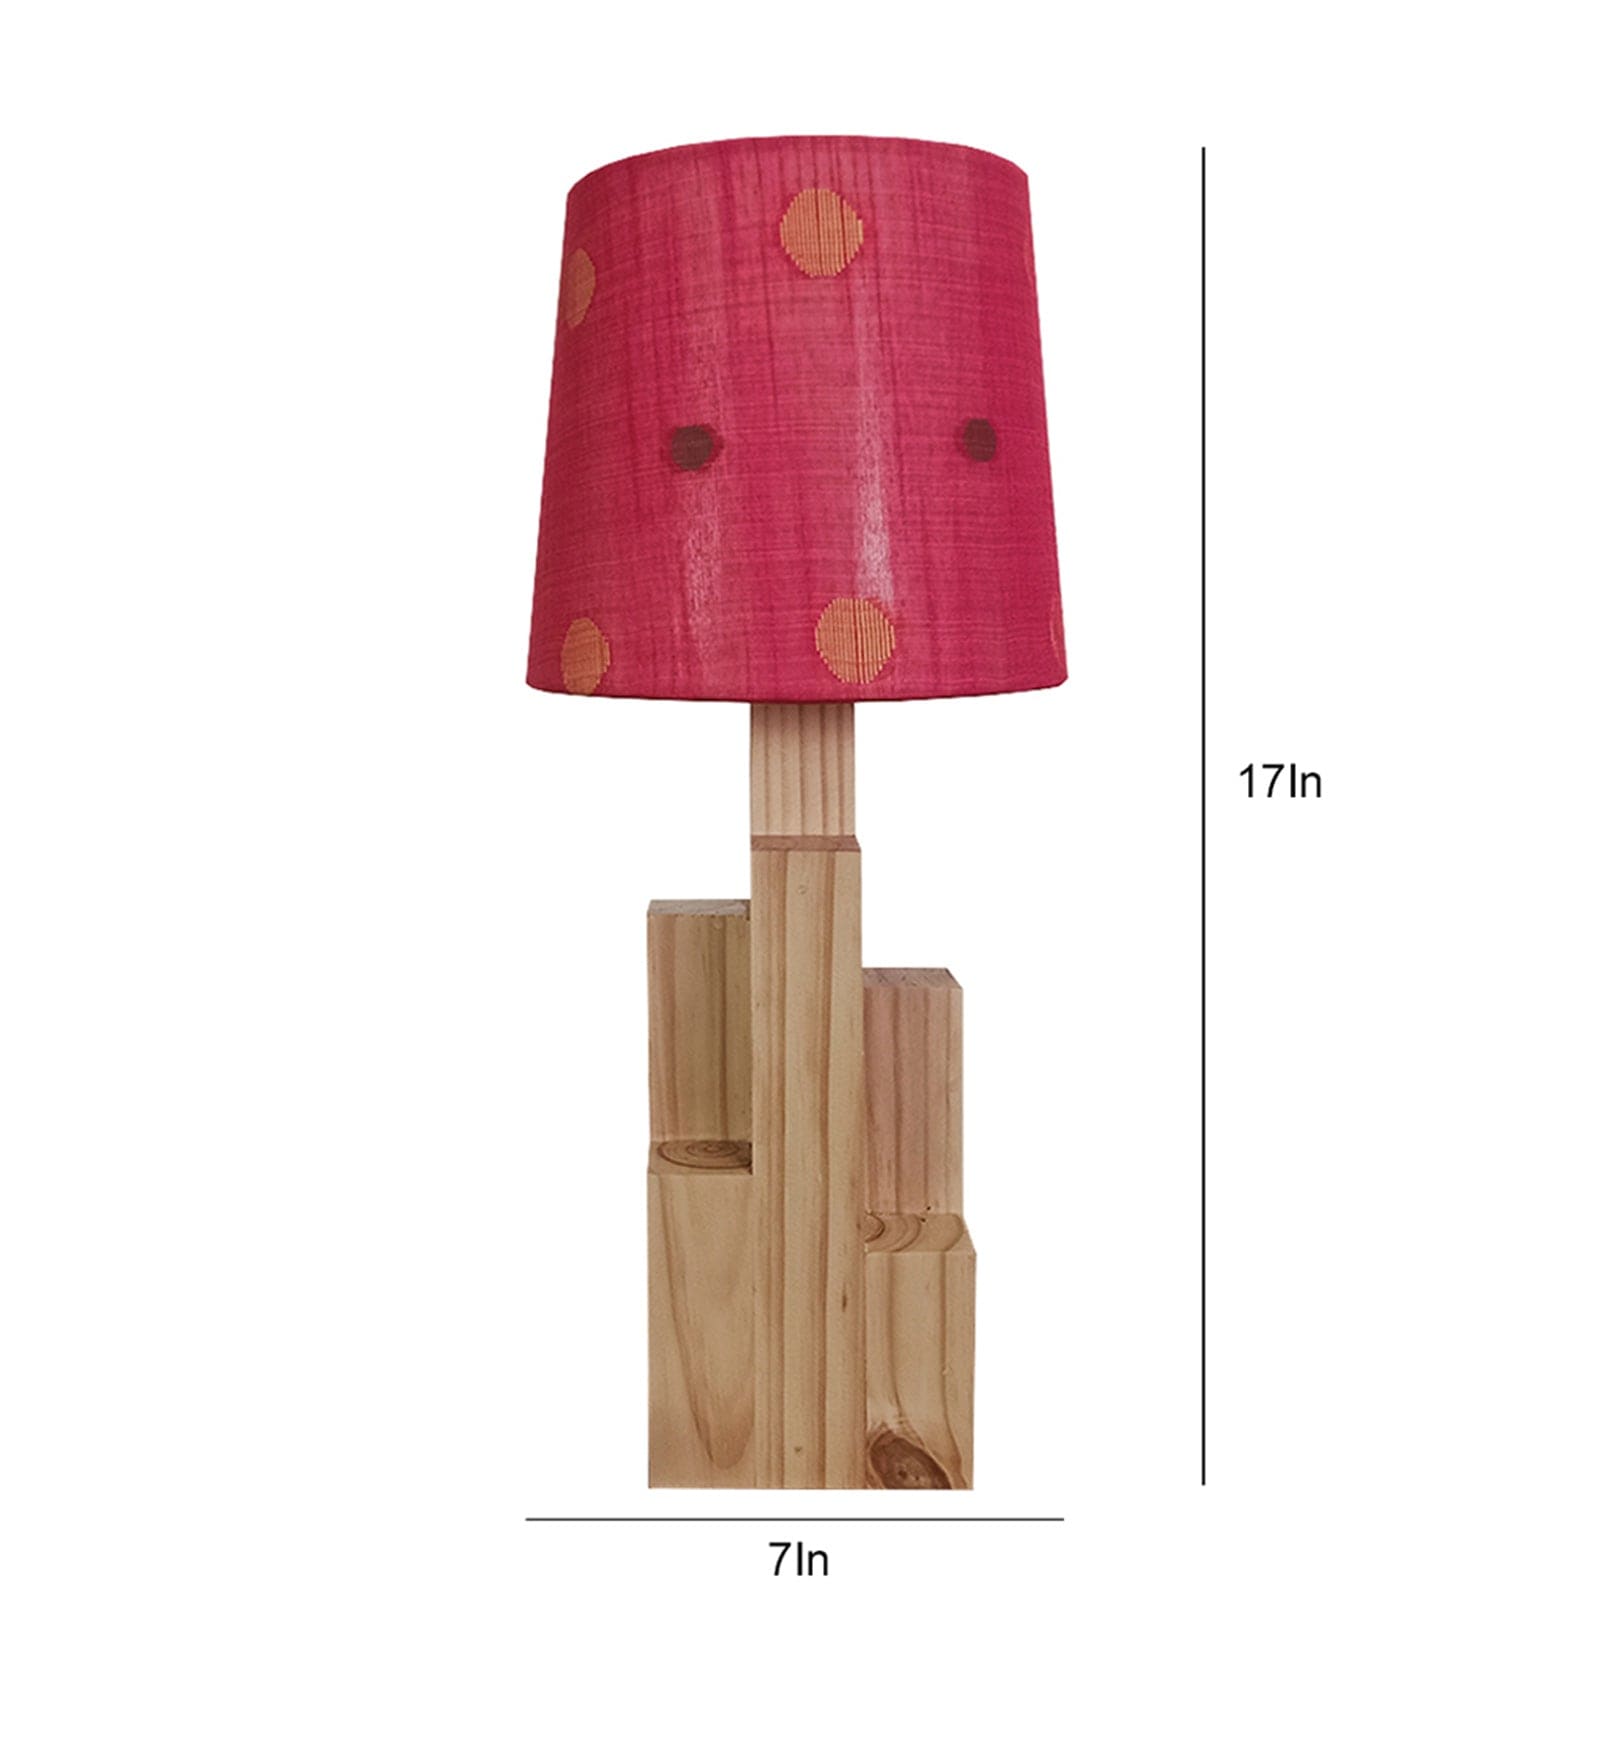 Skyline Beige Wooden Table Lamp with Red Printed Fabric Lampshade (BULB NOT INCLUDED)